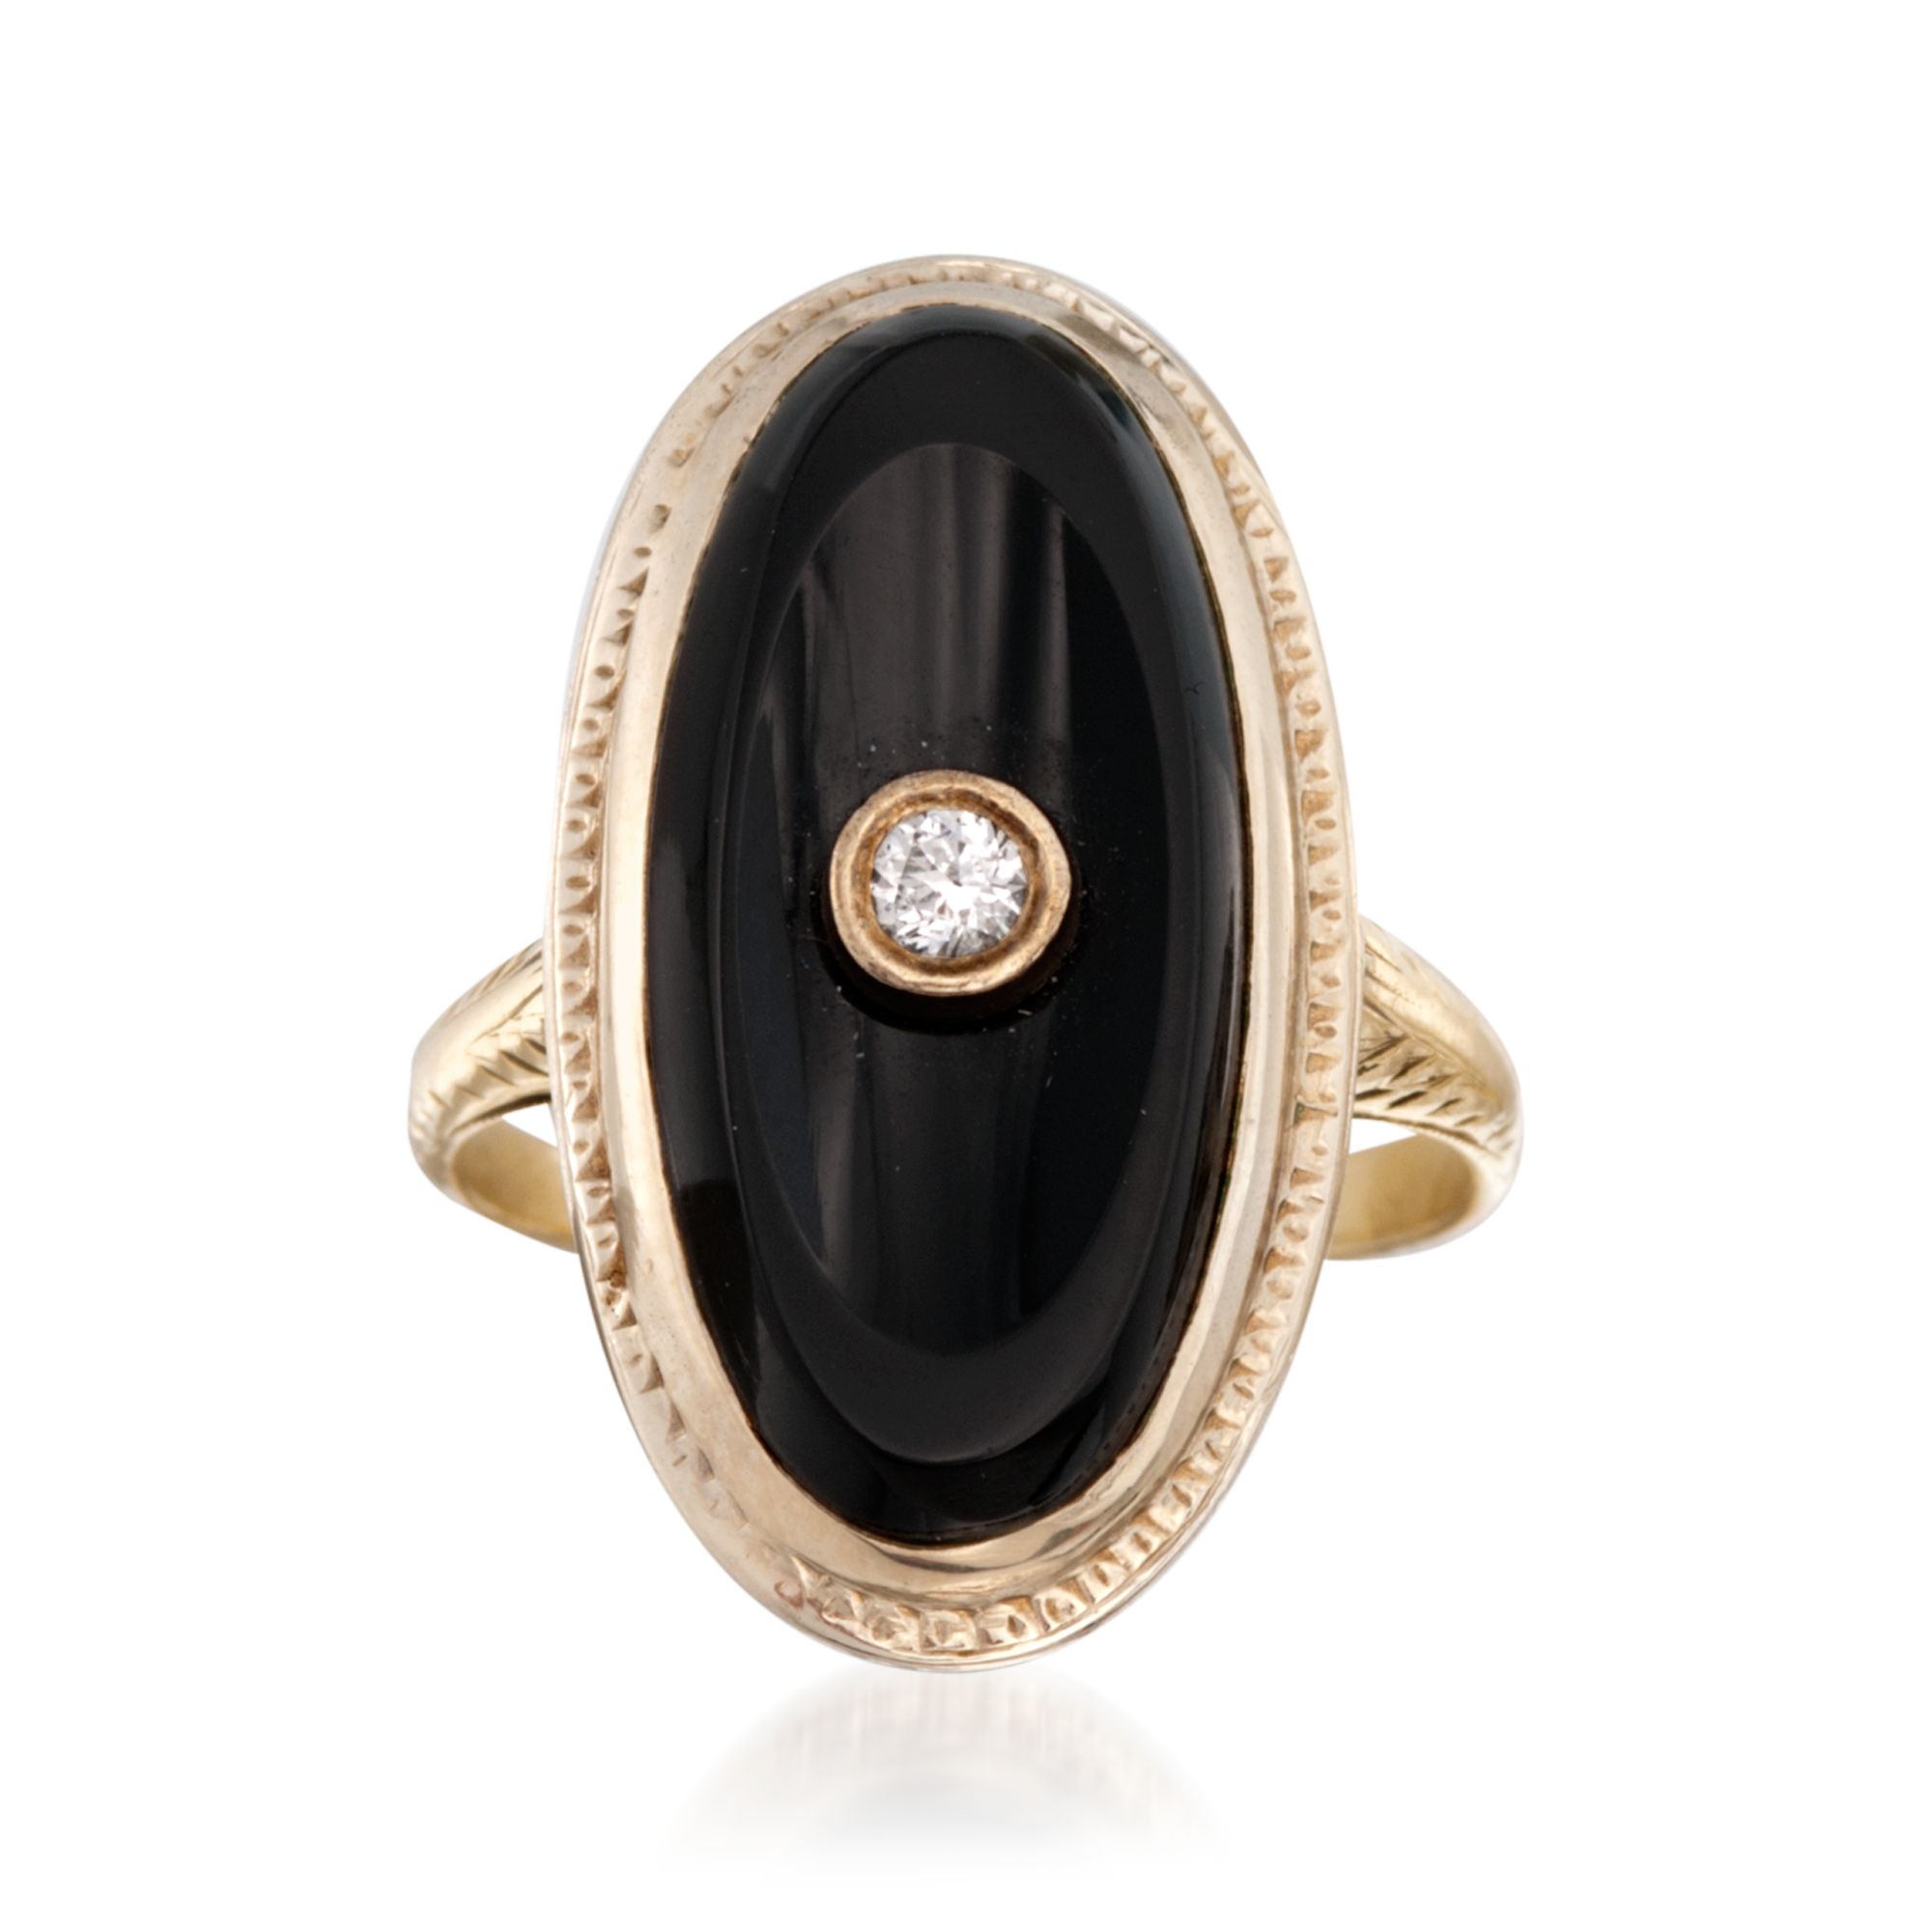 C. 1950 Vintage Black Onyx Ring with Diamond Accent in 14kt Two-Tone Gold |  Ross-Simons